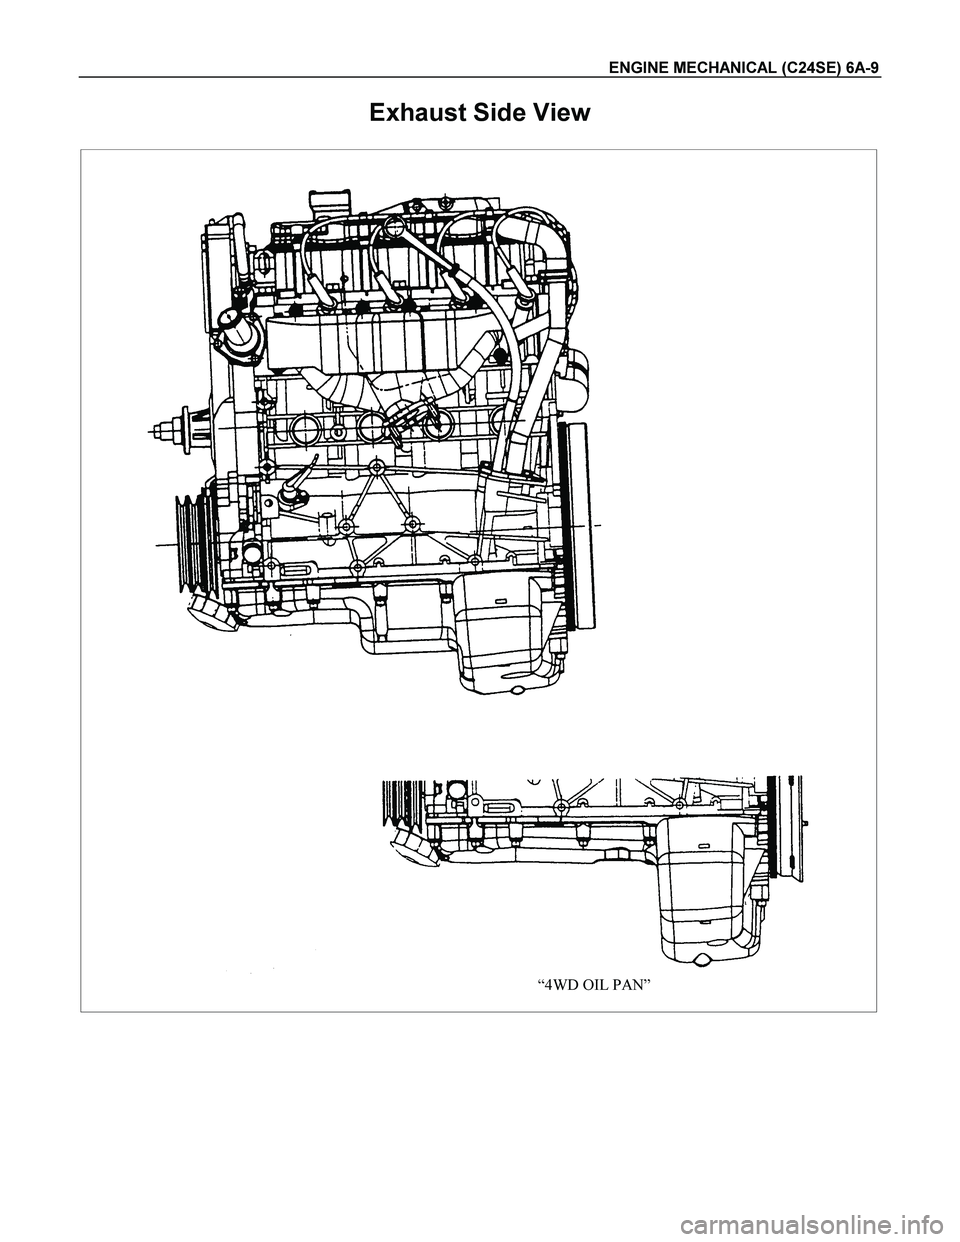 ISUZU TF SERIES 2004  Workshop Manual ENGINE MECHANICAL (C24SE) 6A-9 
Exhaust Side View 
“4WD OIL PAN”
  